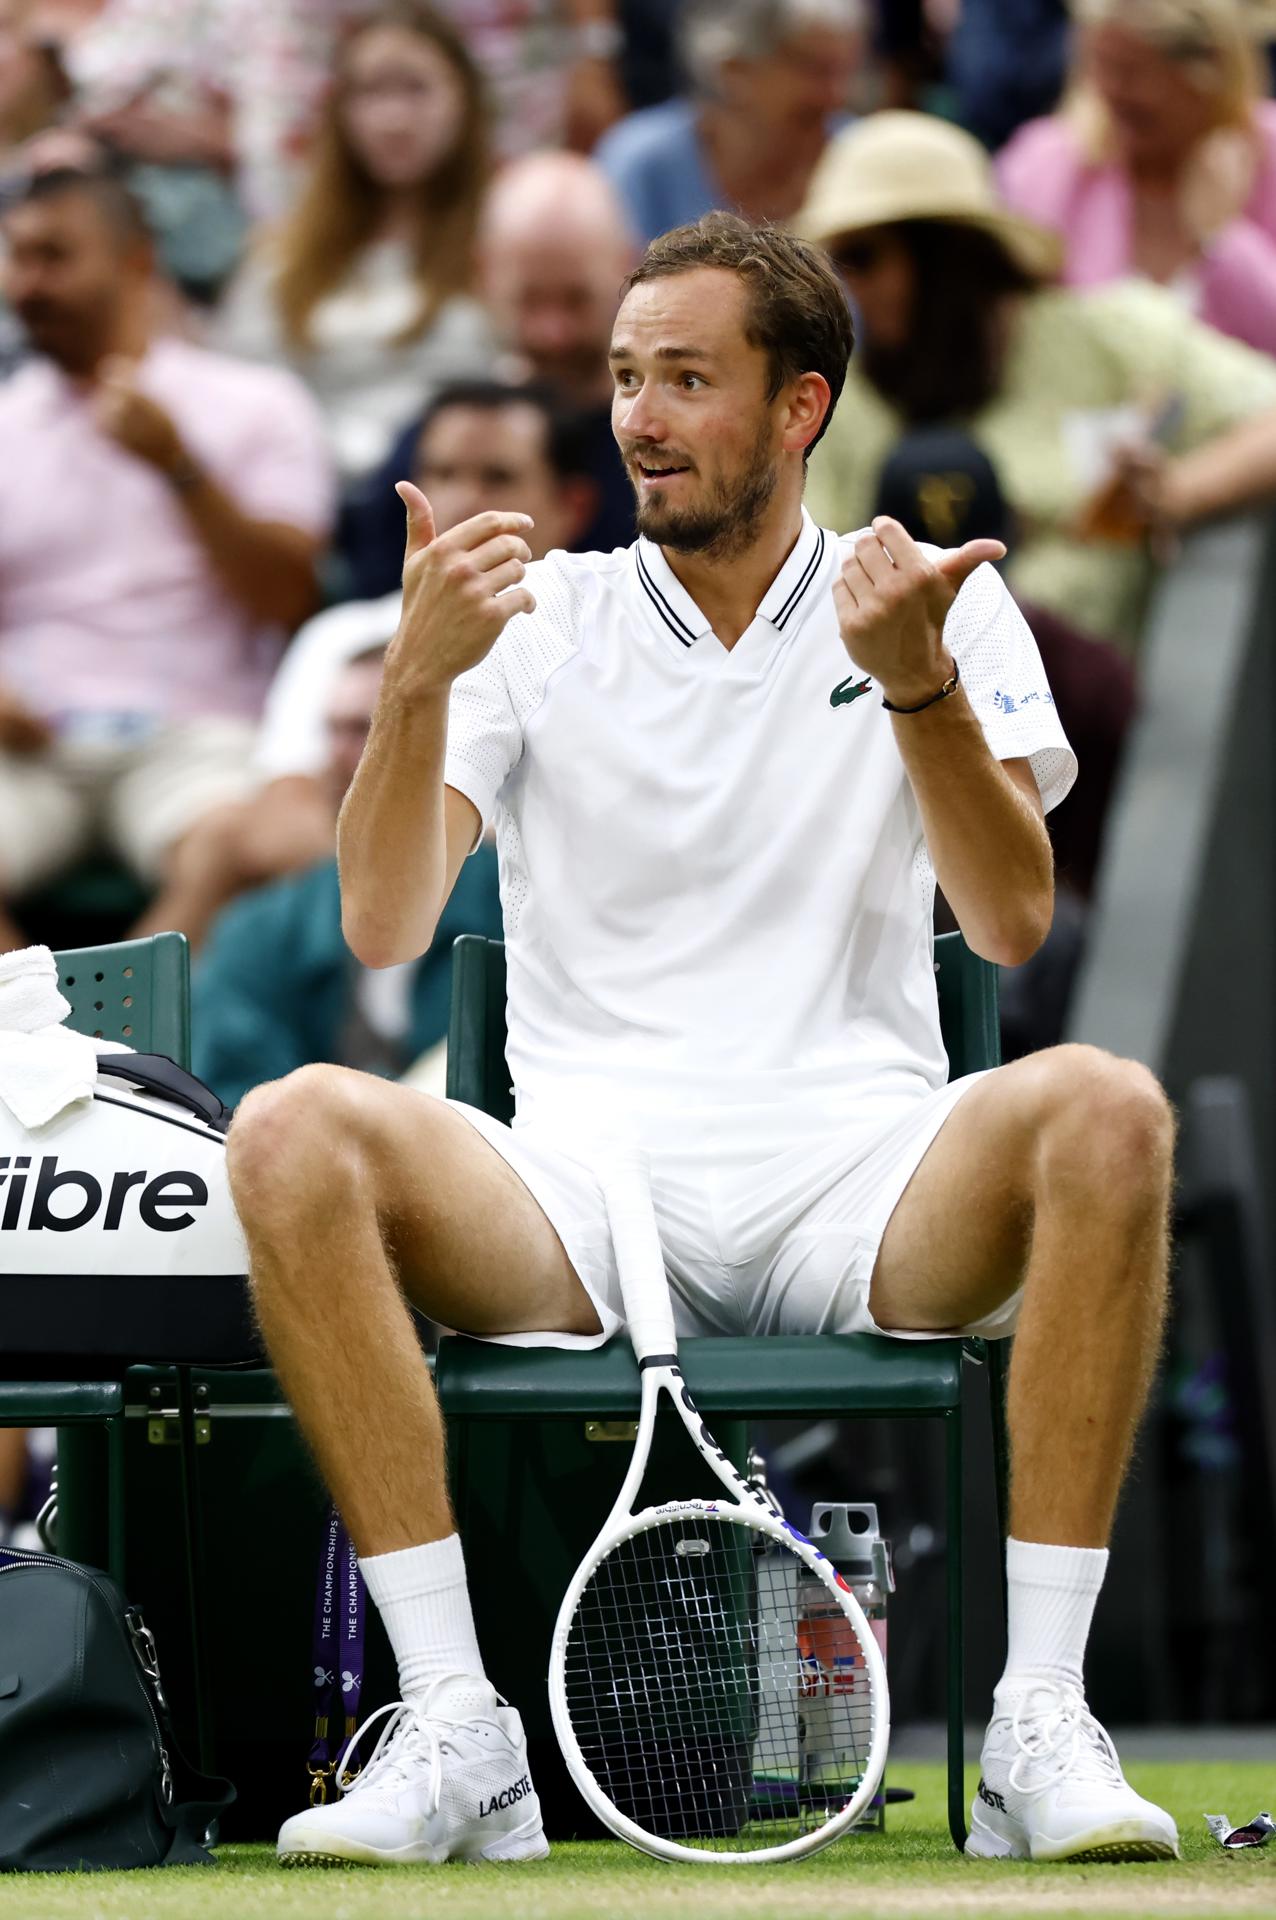 Third-seeded Russian Daniil Medvedev reacts during his Wimbledon semifinal match against Spanish world No. 1 Carlos Alcaraz on 14 July 2023 in London, United Kingdom. Alcaraz won 6-3, 6-3, 6-3. CEFE/EPA/ISABEL INFANTES
